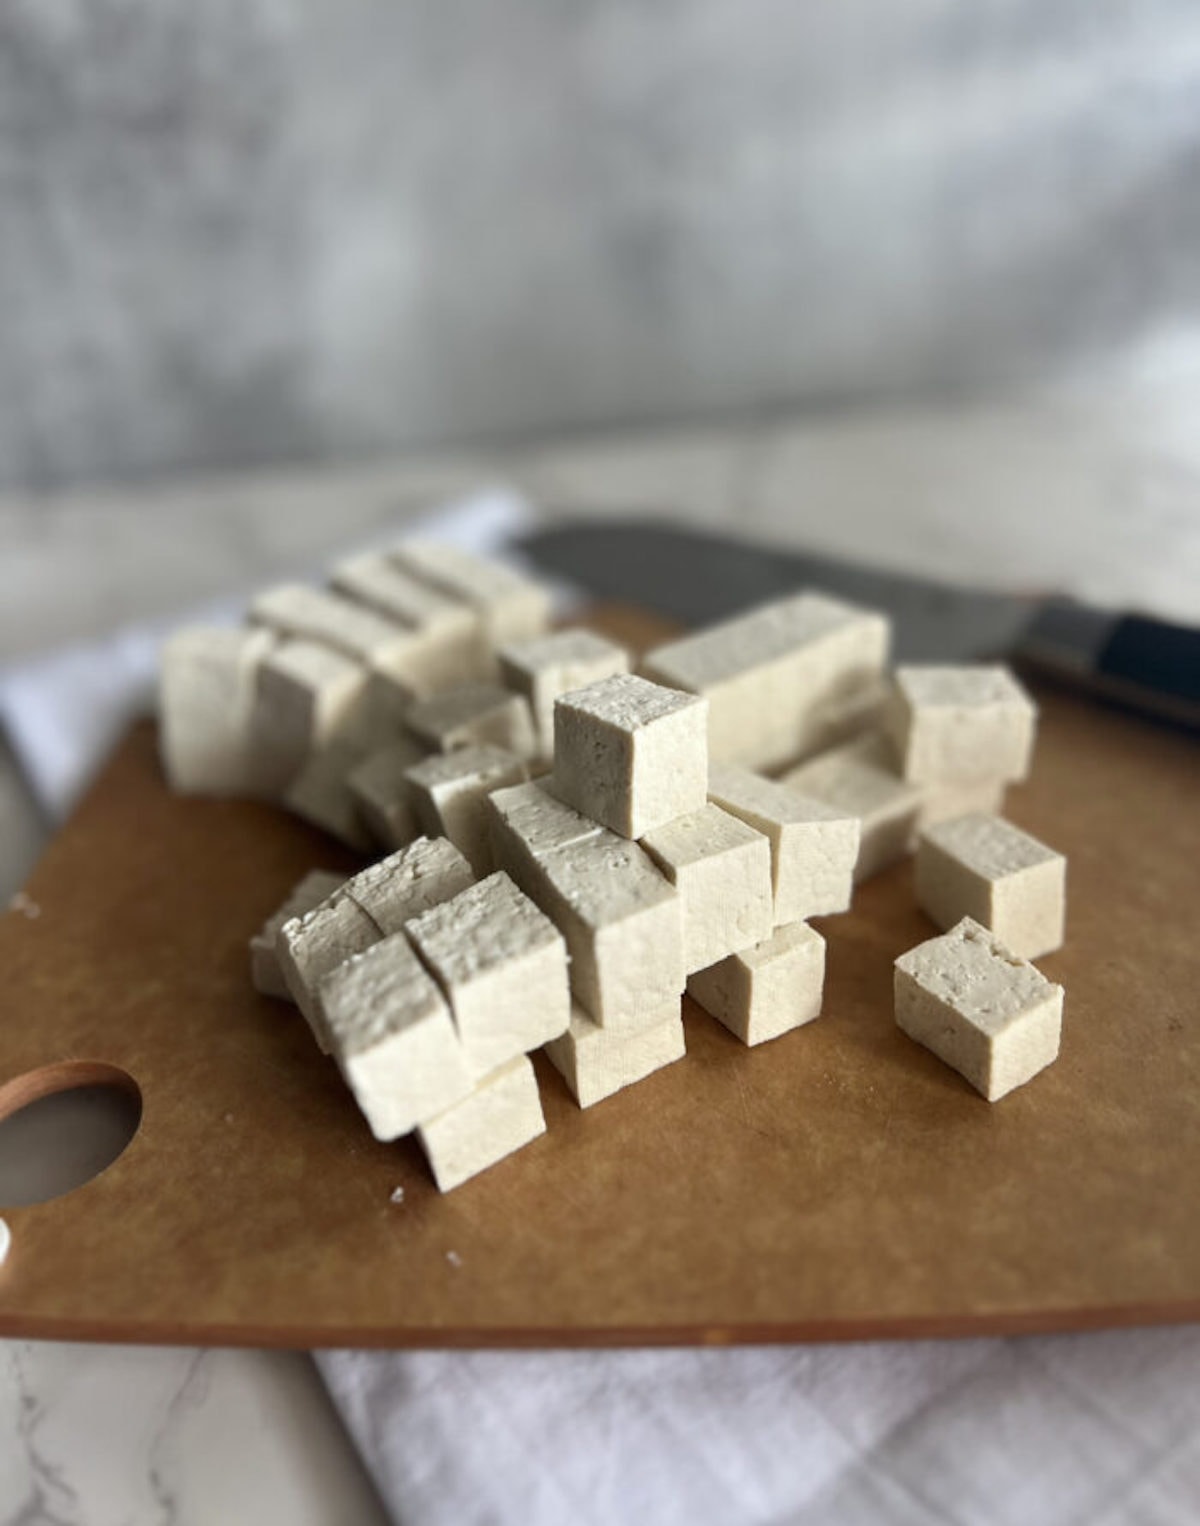 This is a photo of cut tofu cubes.